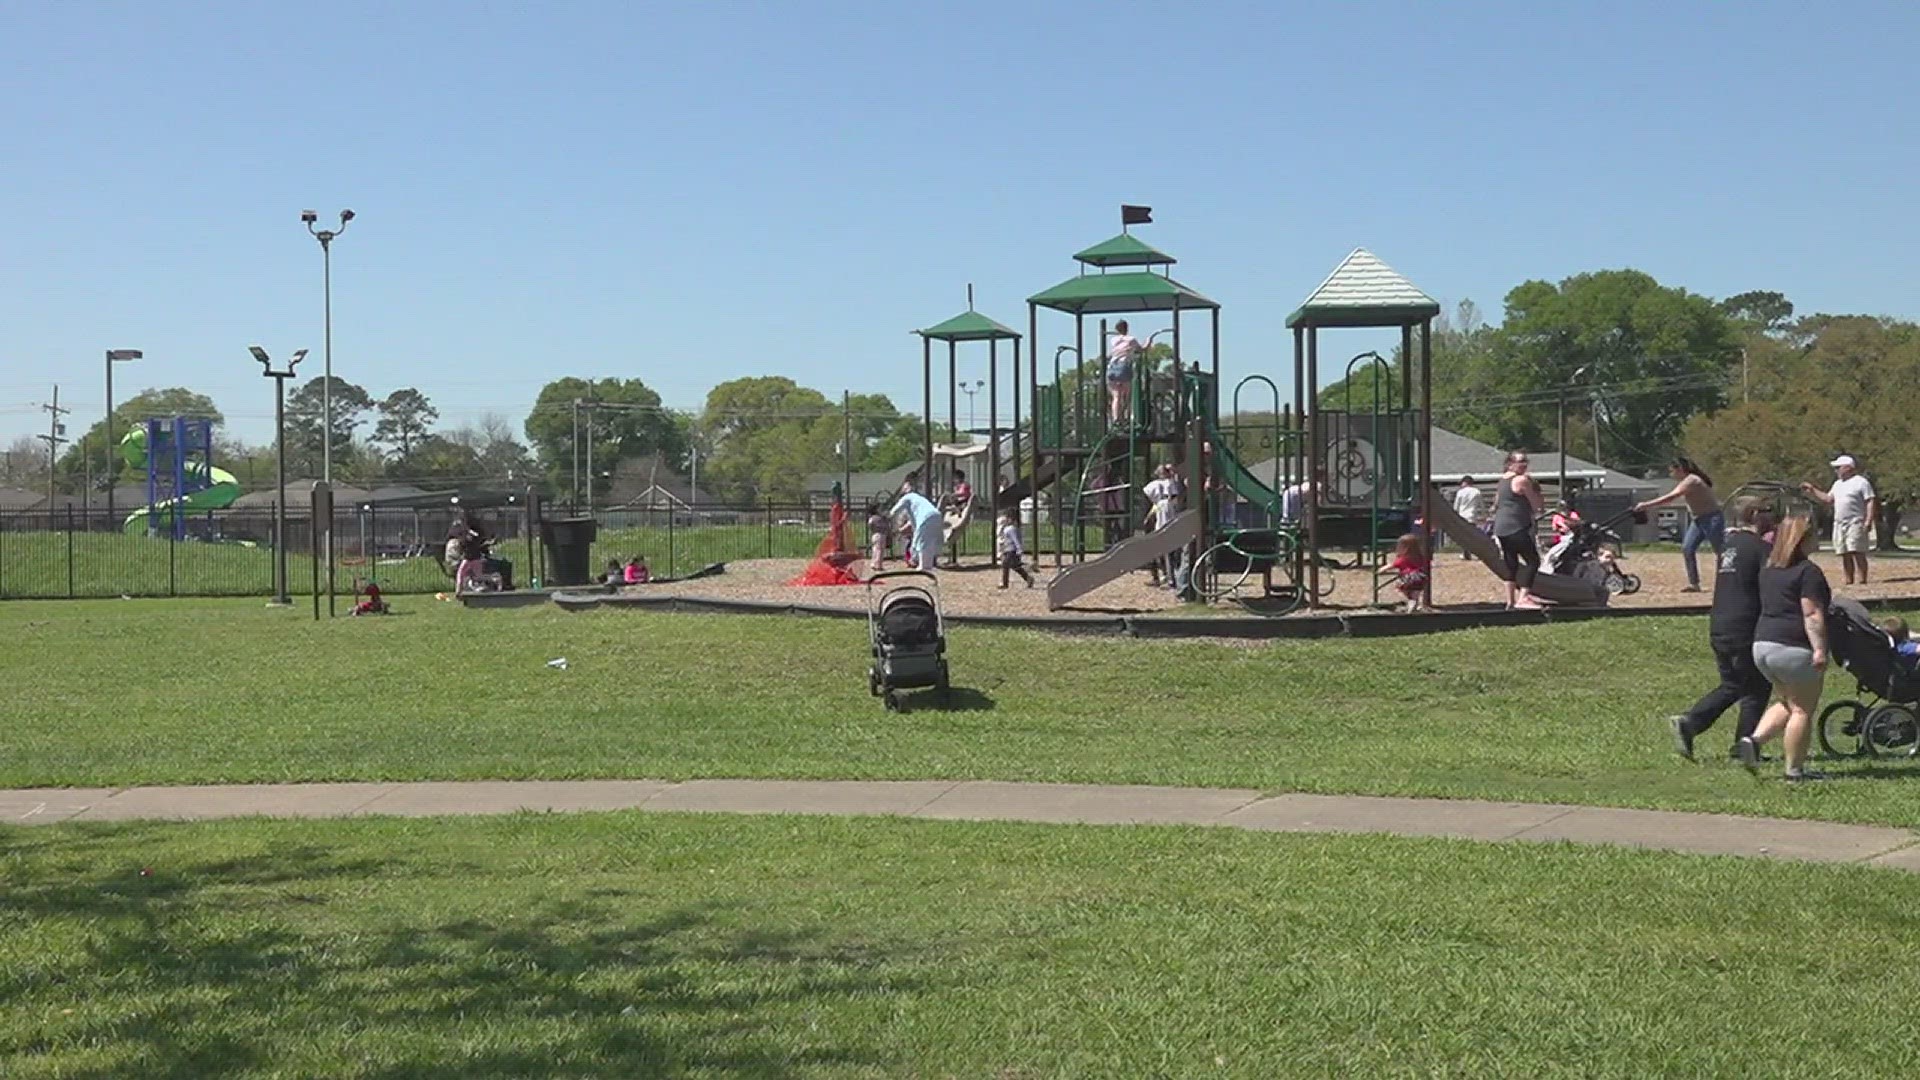 Once completed, the project will become the first accessible playground in the city's park system.